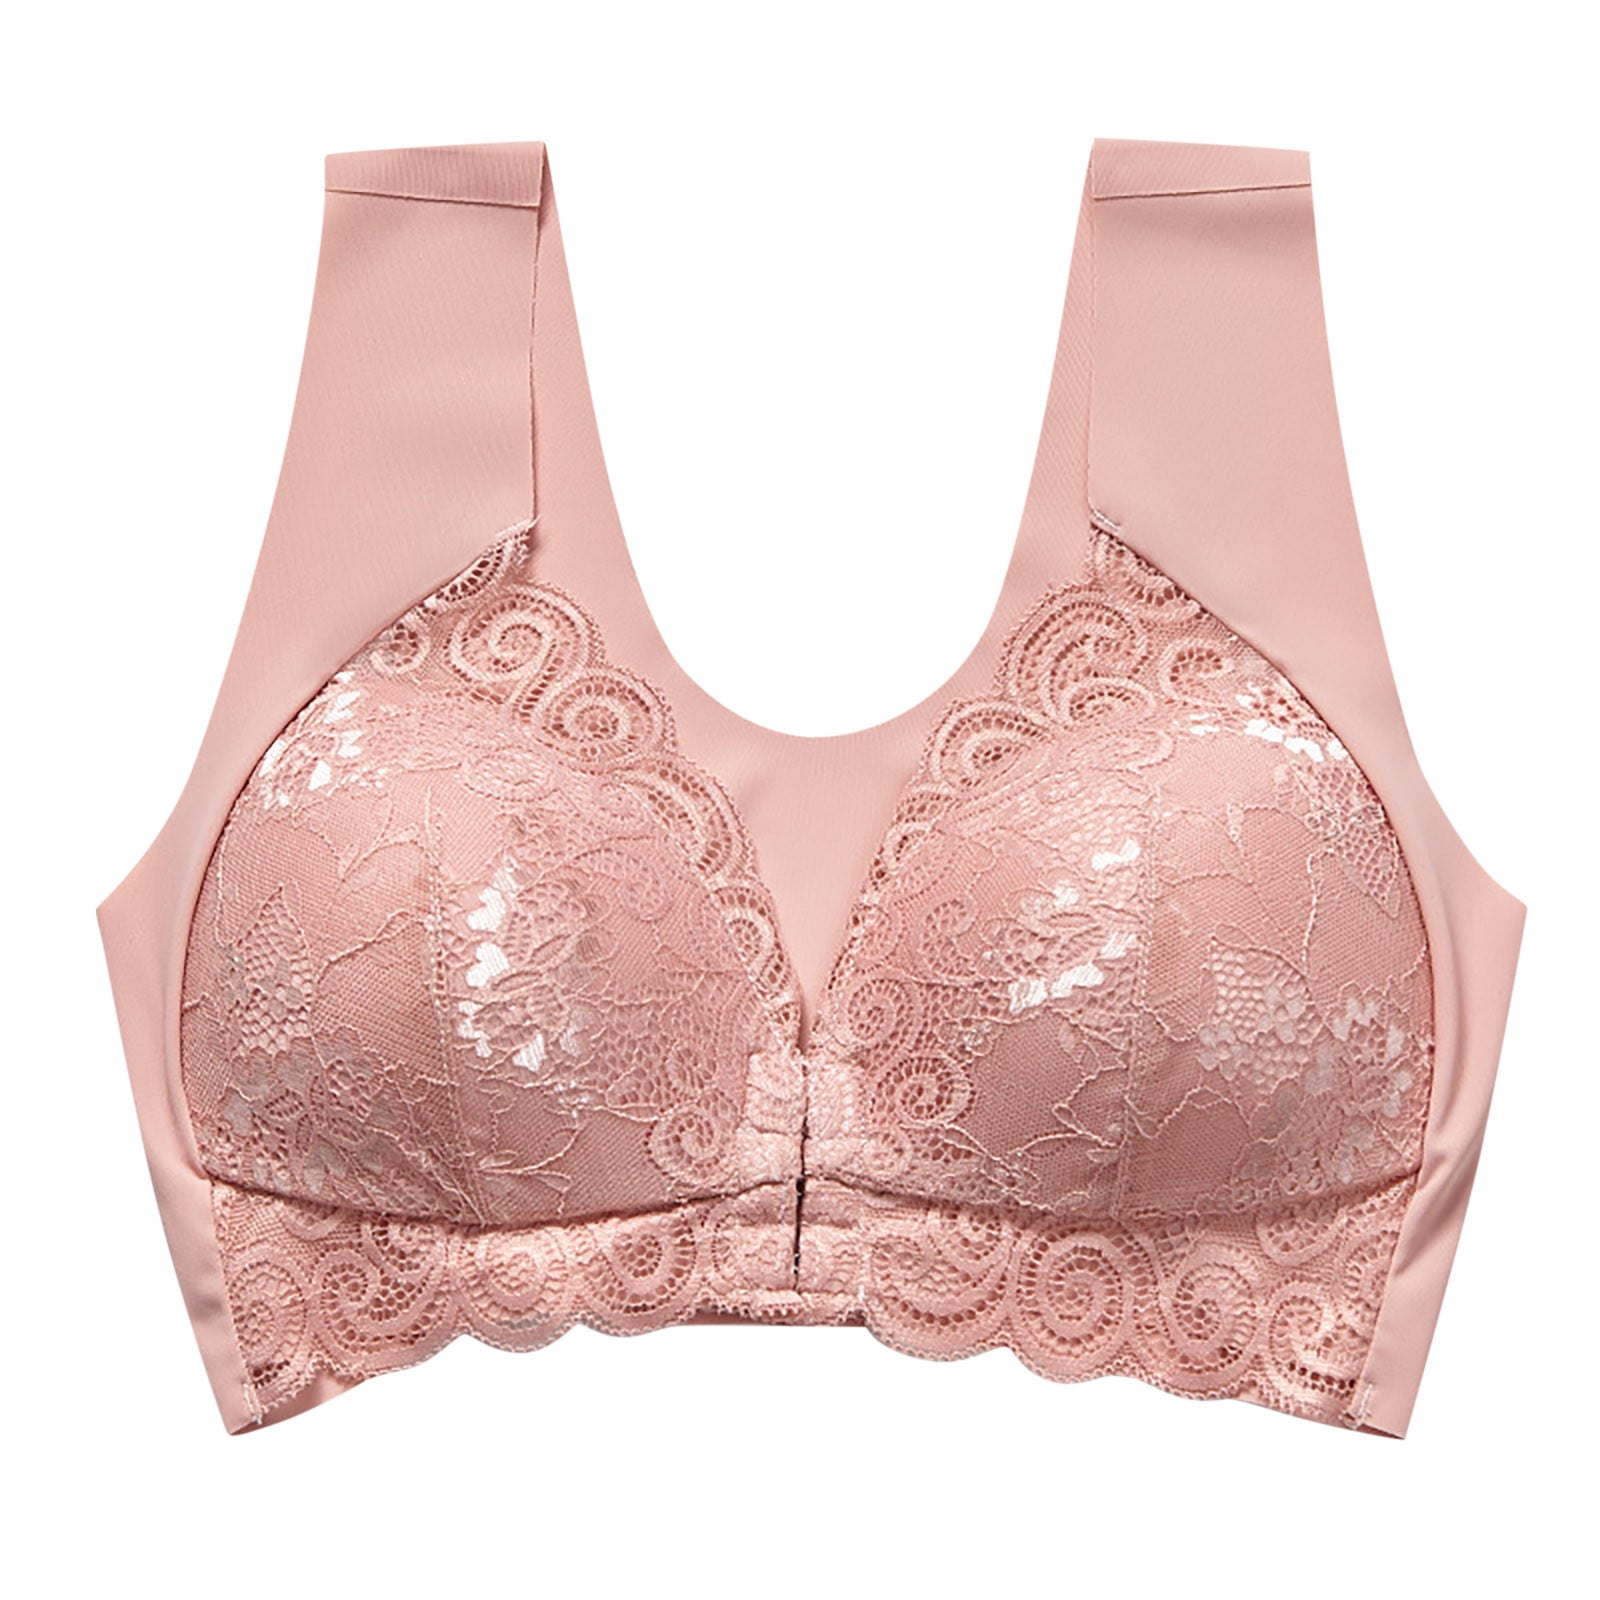 QLEICOM Everyday Bras for Women Comfort Lift Wirefree Bra Lace